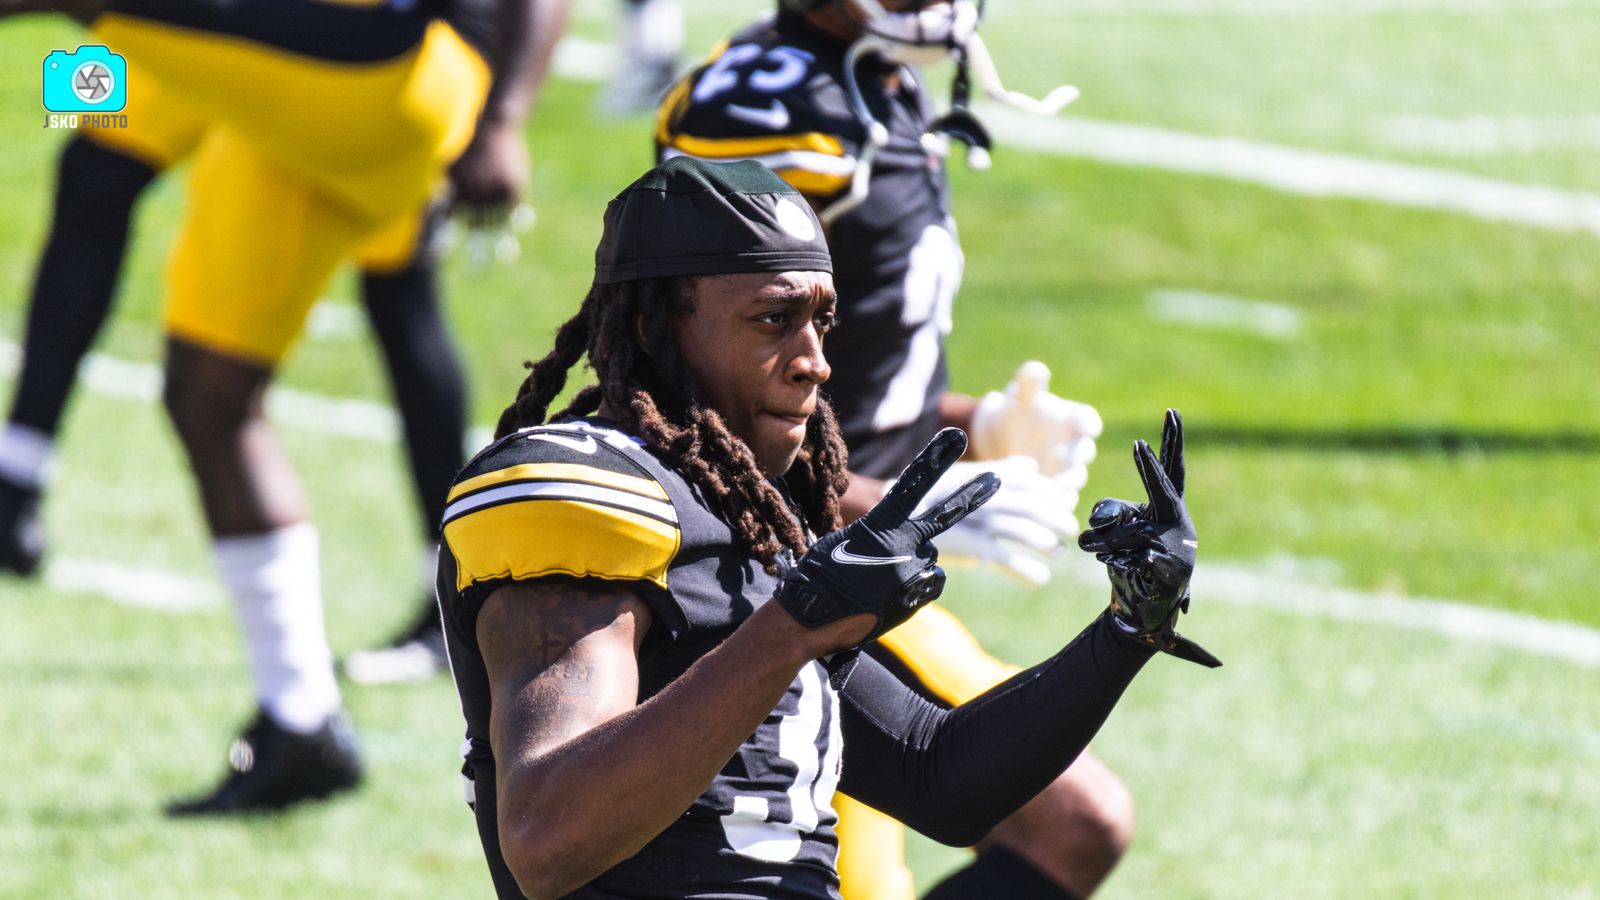 Steelers set to lose Terrell Edmunds in free agency